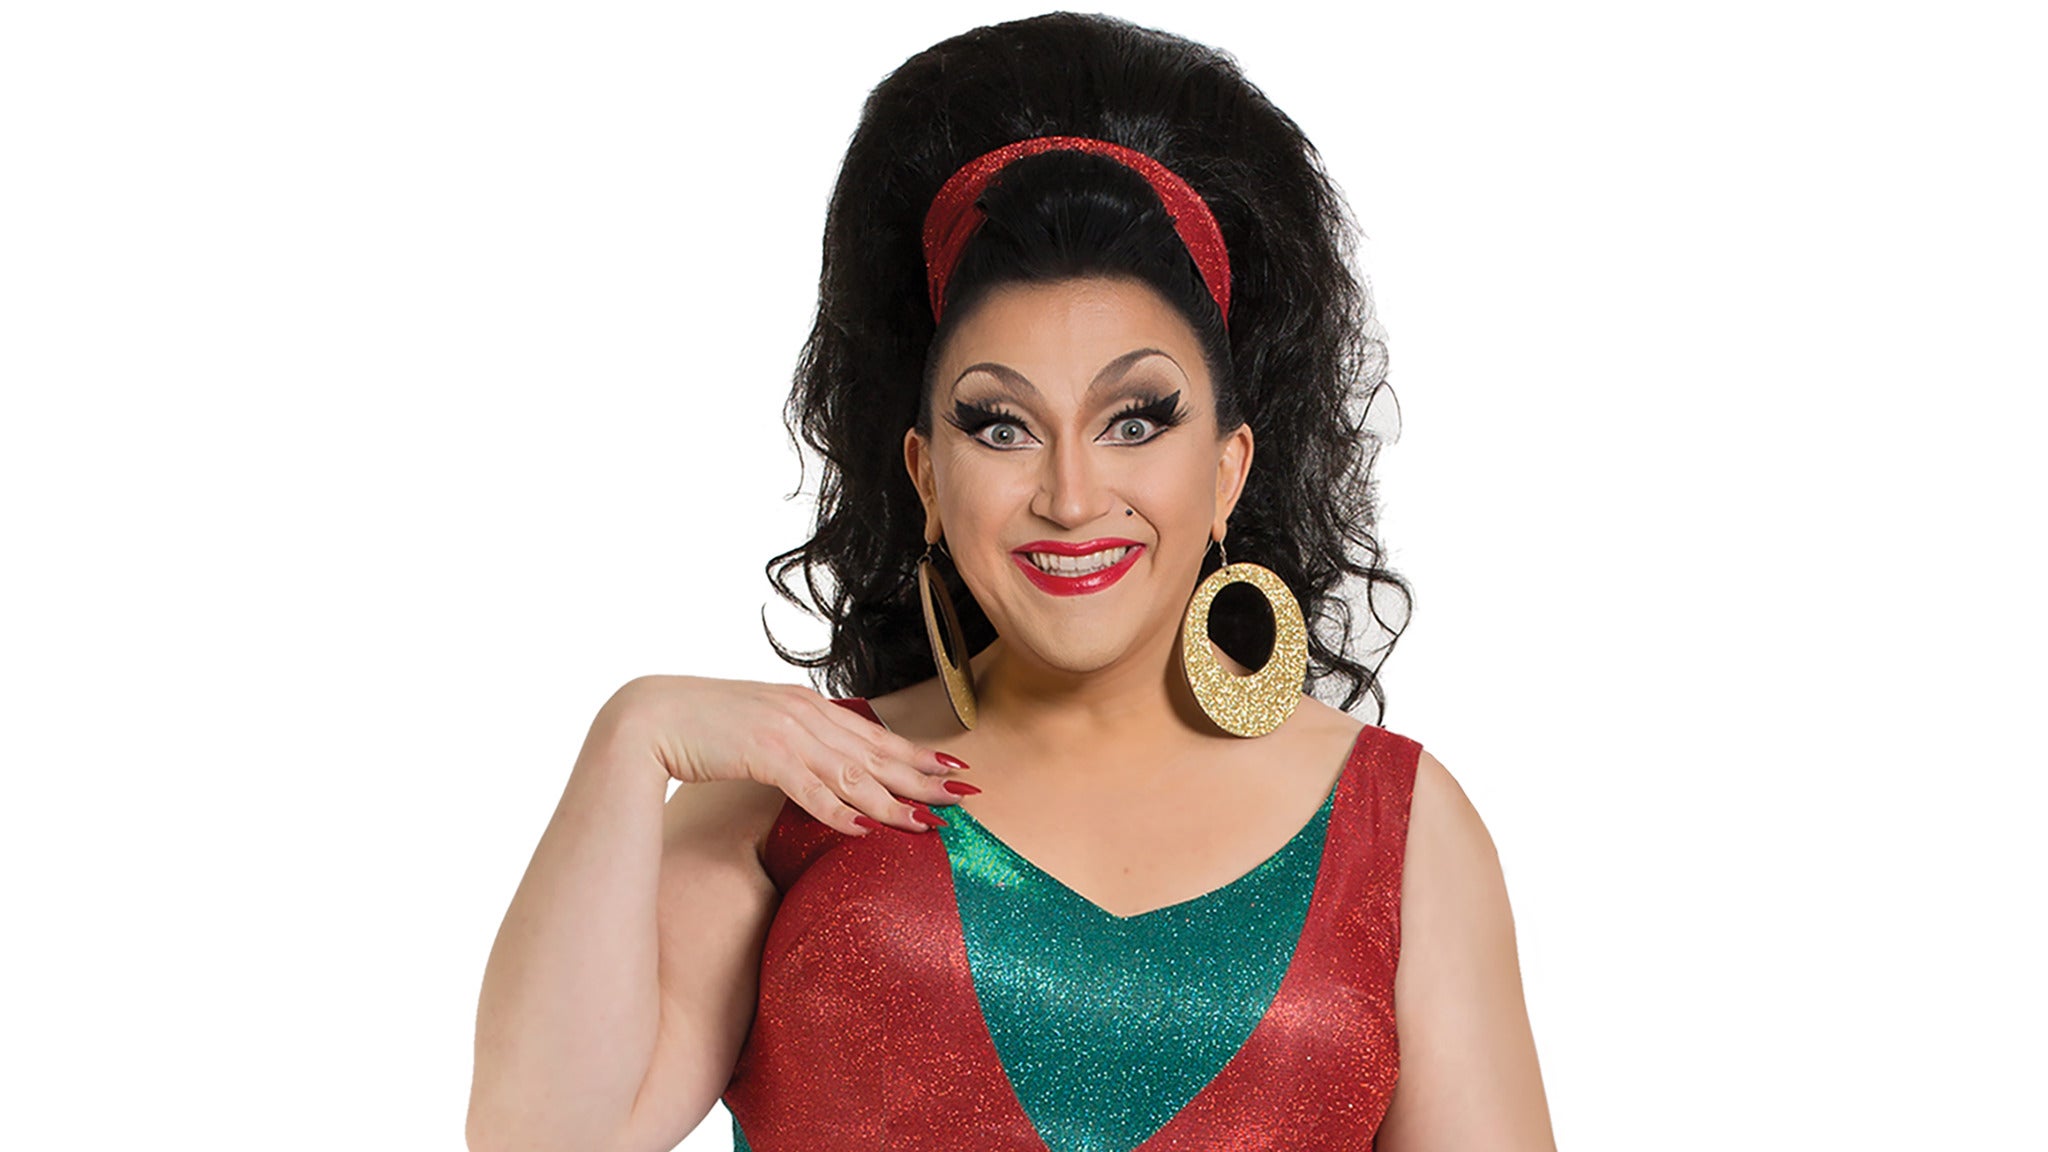 BenDeLaCreme in Ithaca promo photo for Exclusive presale offer code